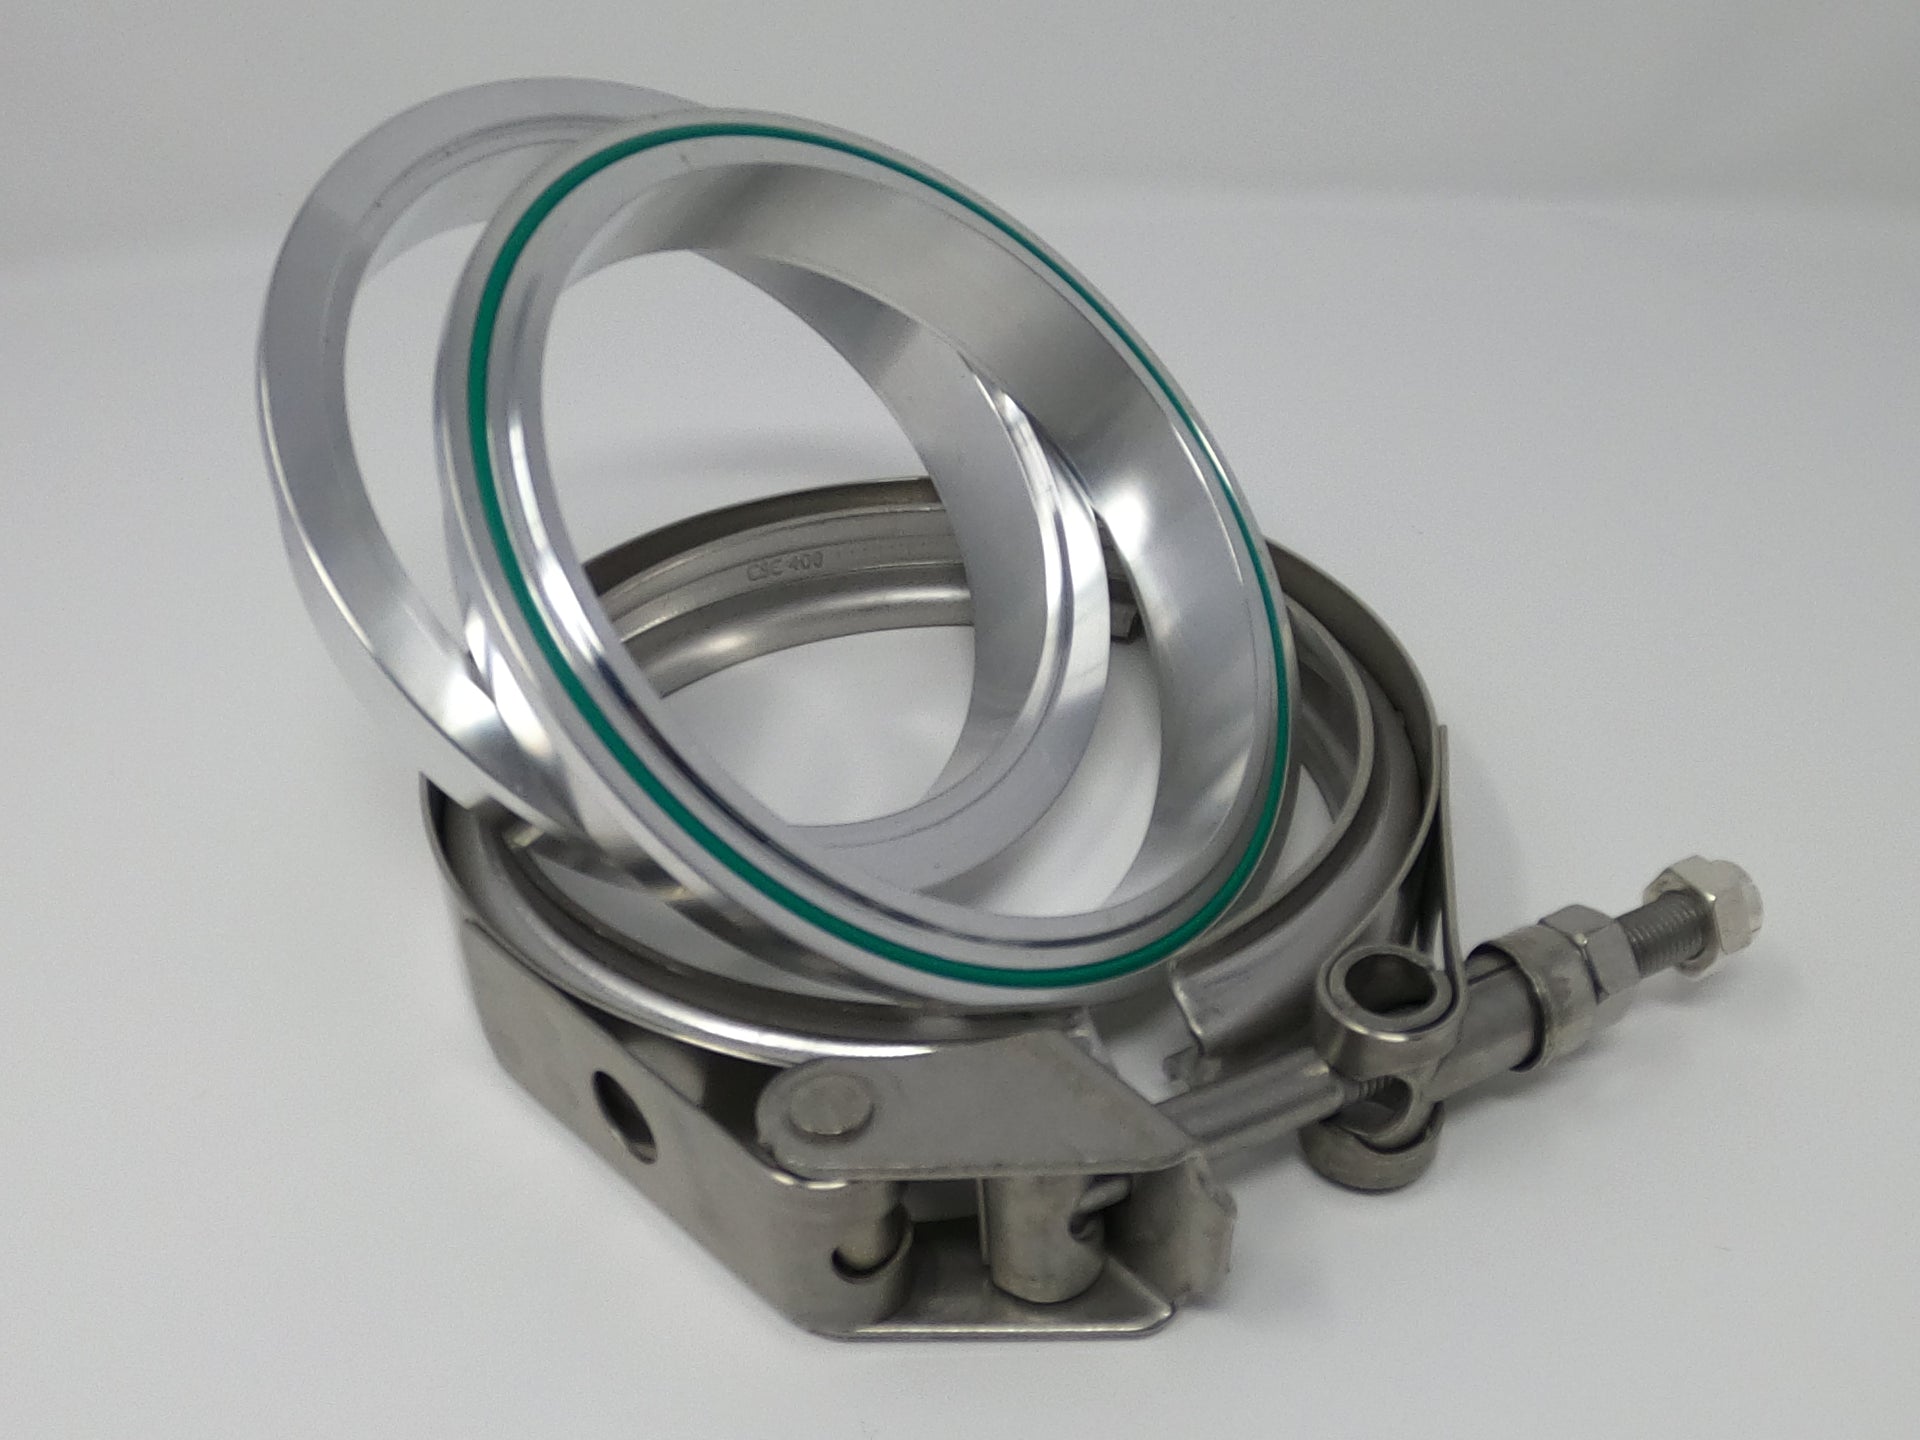 4.0" Aluminum V-Band Flange Assembly with Clamp - Black Sheep Industries Inc.